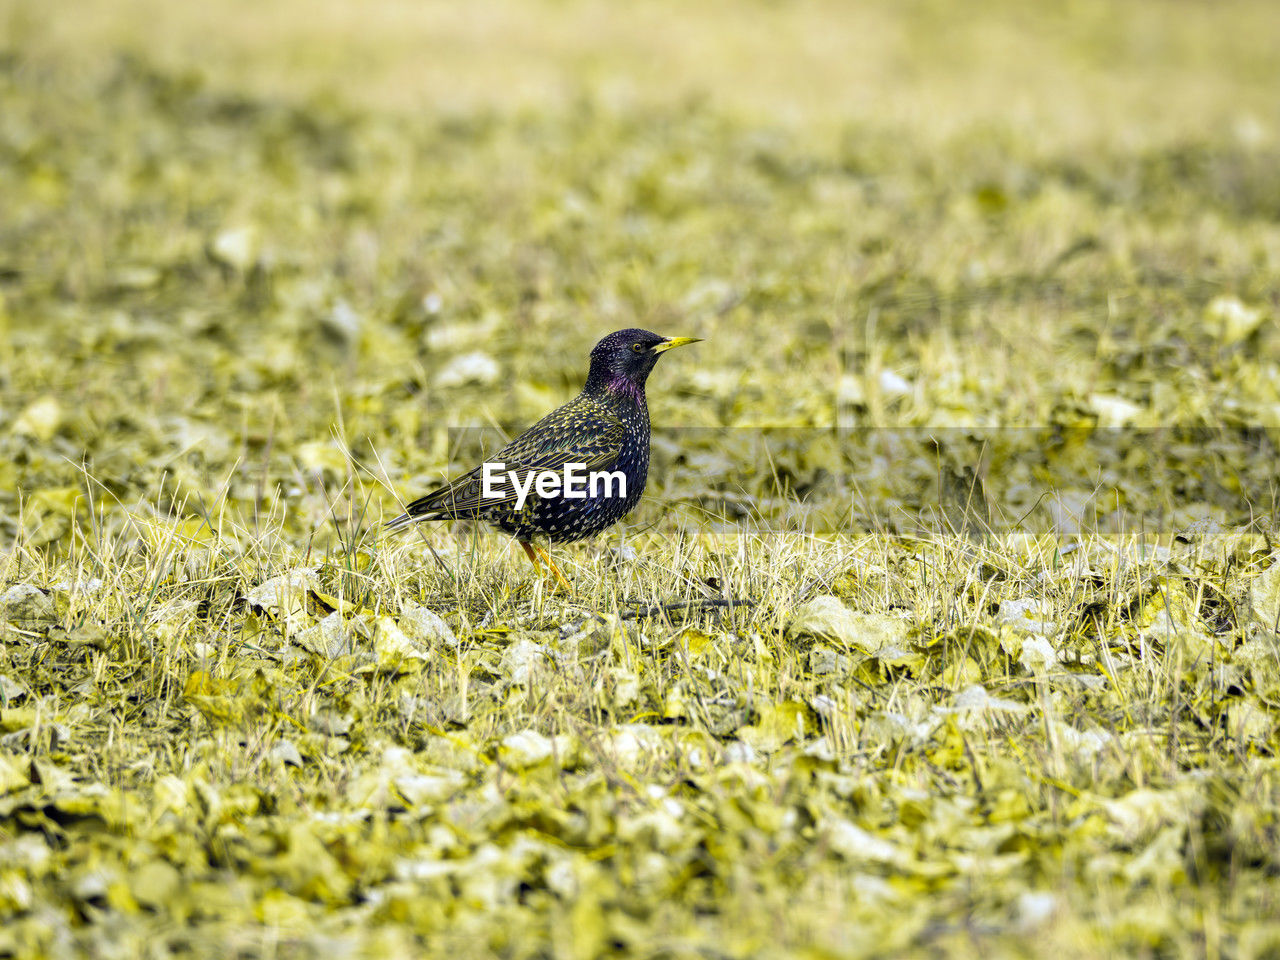 animal themes, animal, animal wildlife, wildlife, one animal, bird, nature, selective focus, grass, plant, green, no people, field, day, flower, prairie, land, outdoors, side view, songbird, beauty in nature, yellow, full length, grassland, perching, sunlight